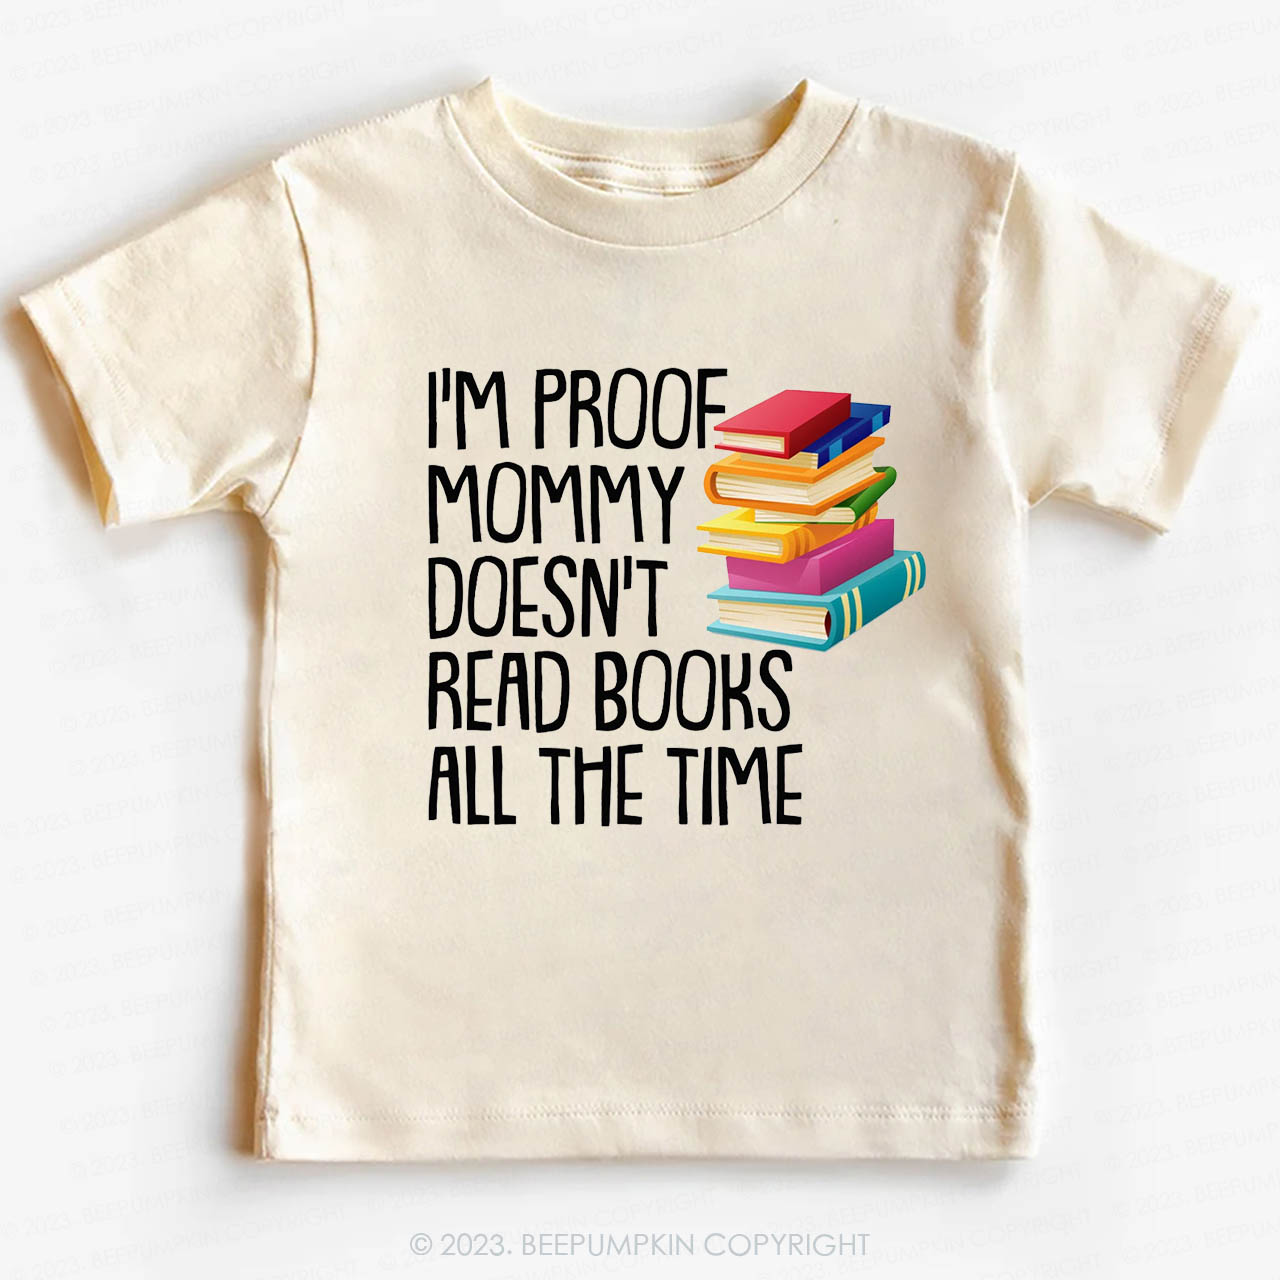 I'm Proof Mommy Doesn't Read Books Kids Shirt